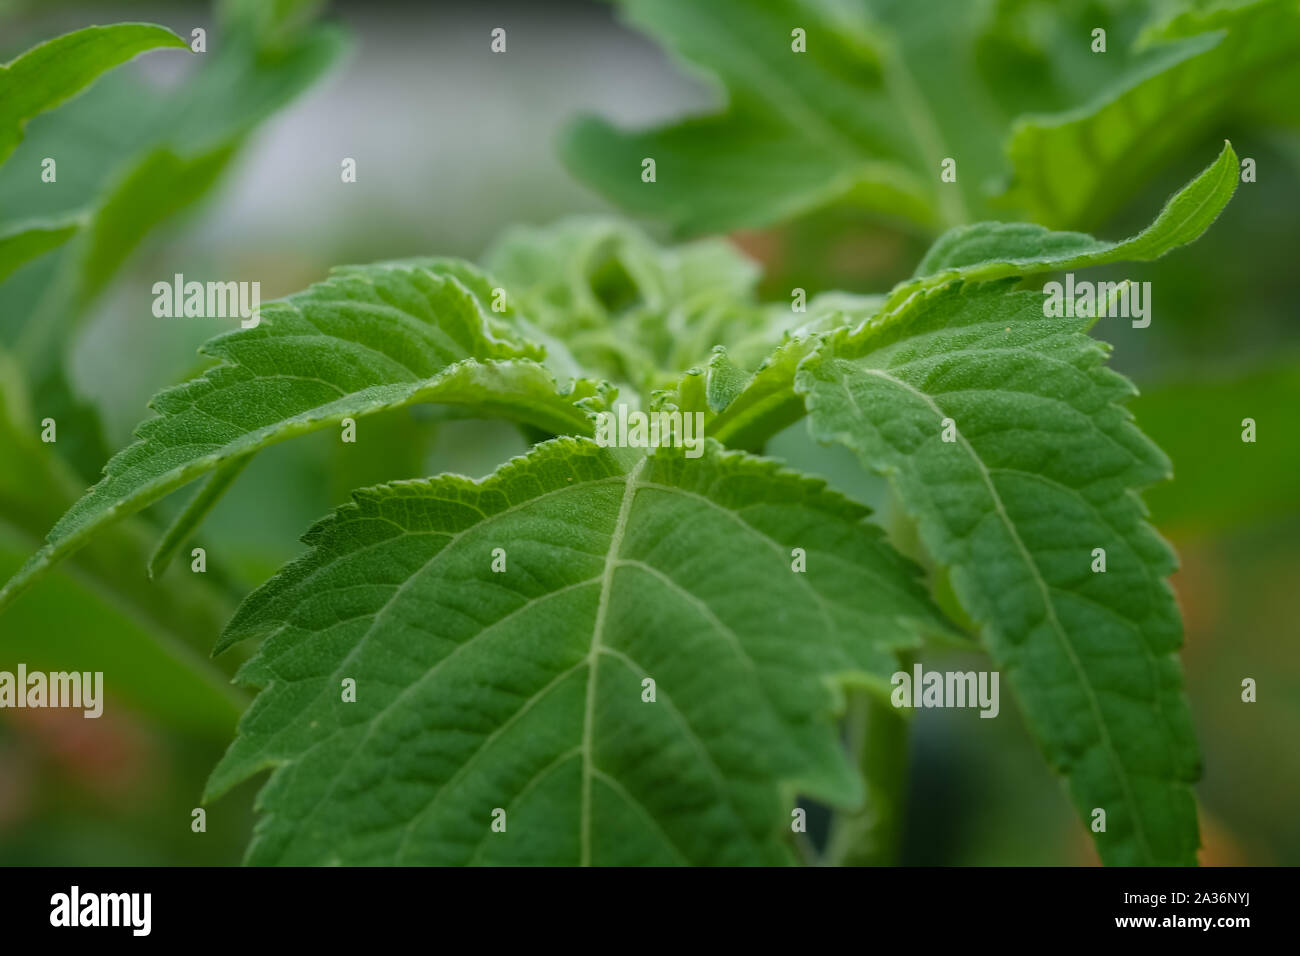 Closeup nature view of green leaf on blurred greenery background. Royalty high quality free stock image of tree, leaf. Stock Photo